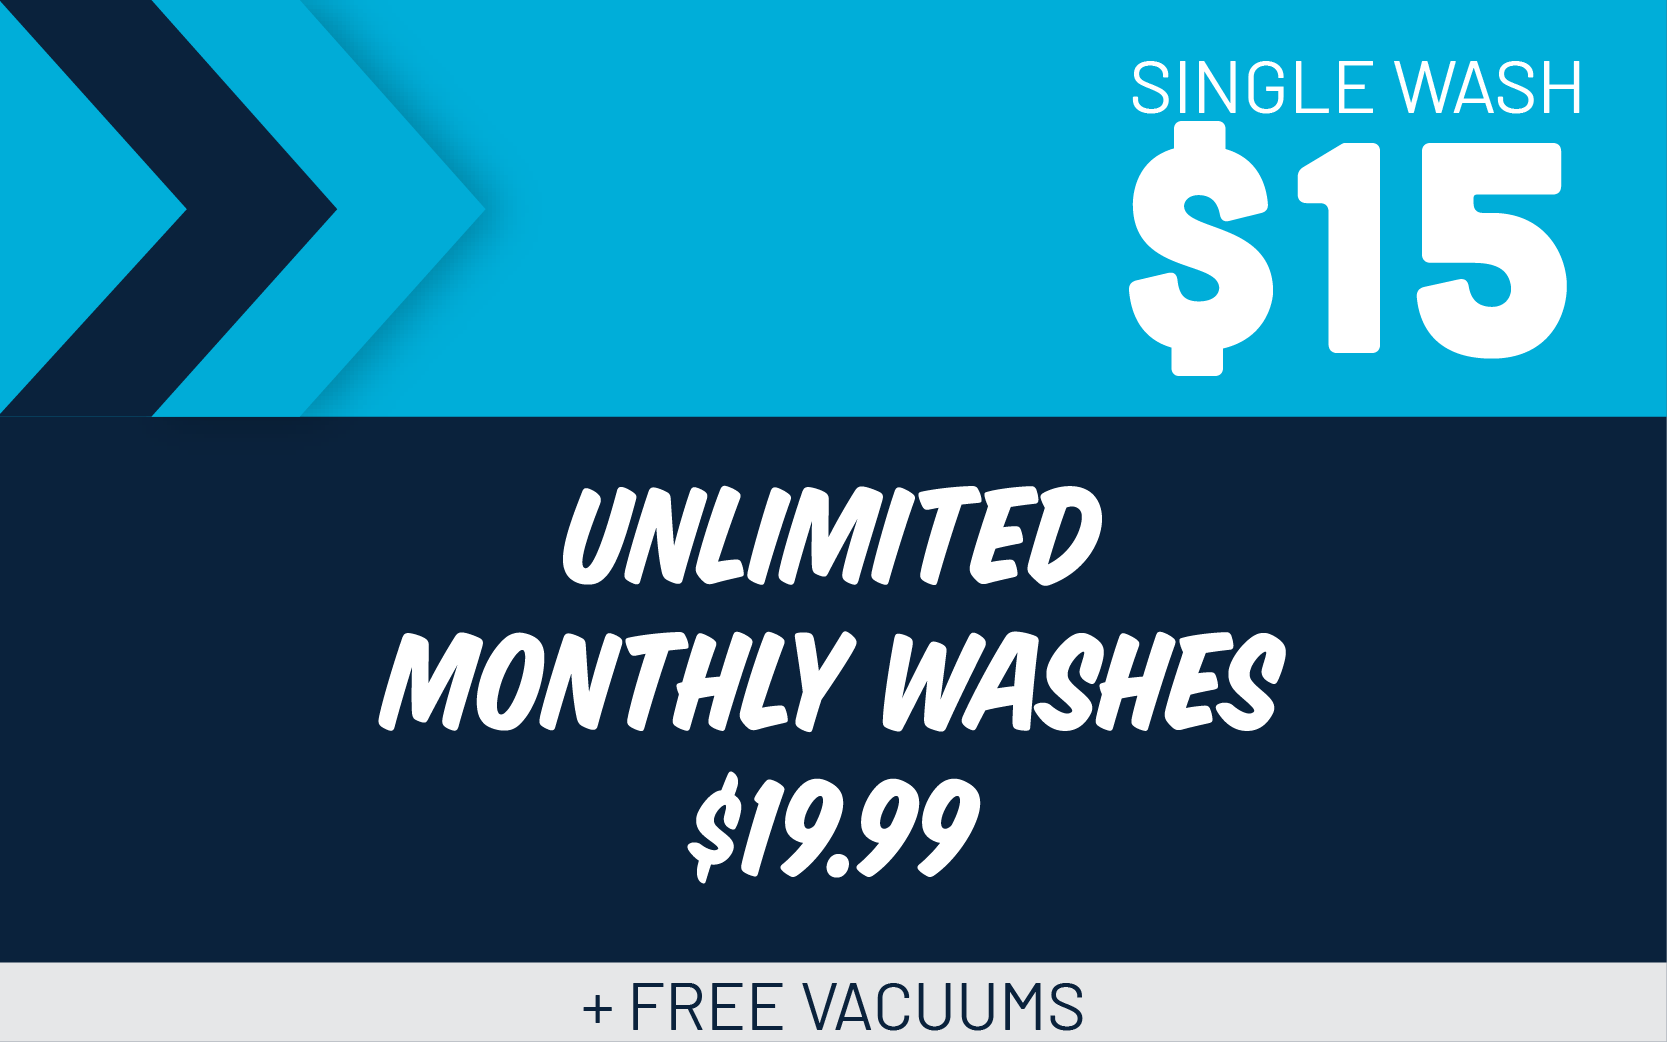 Unlimited Monthly Washes - $19.99 per month